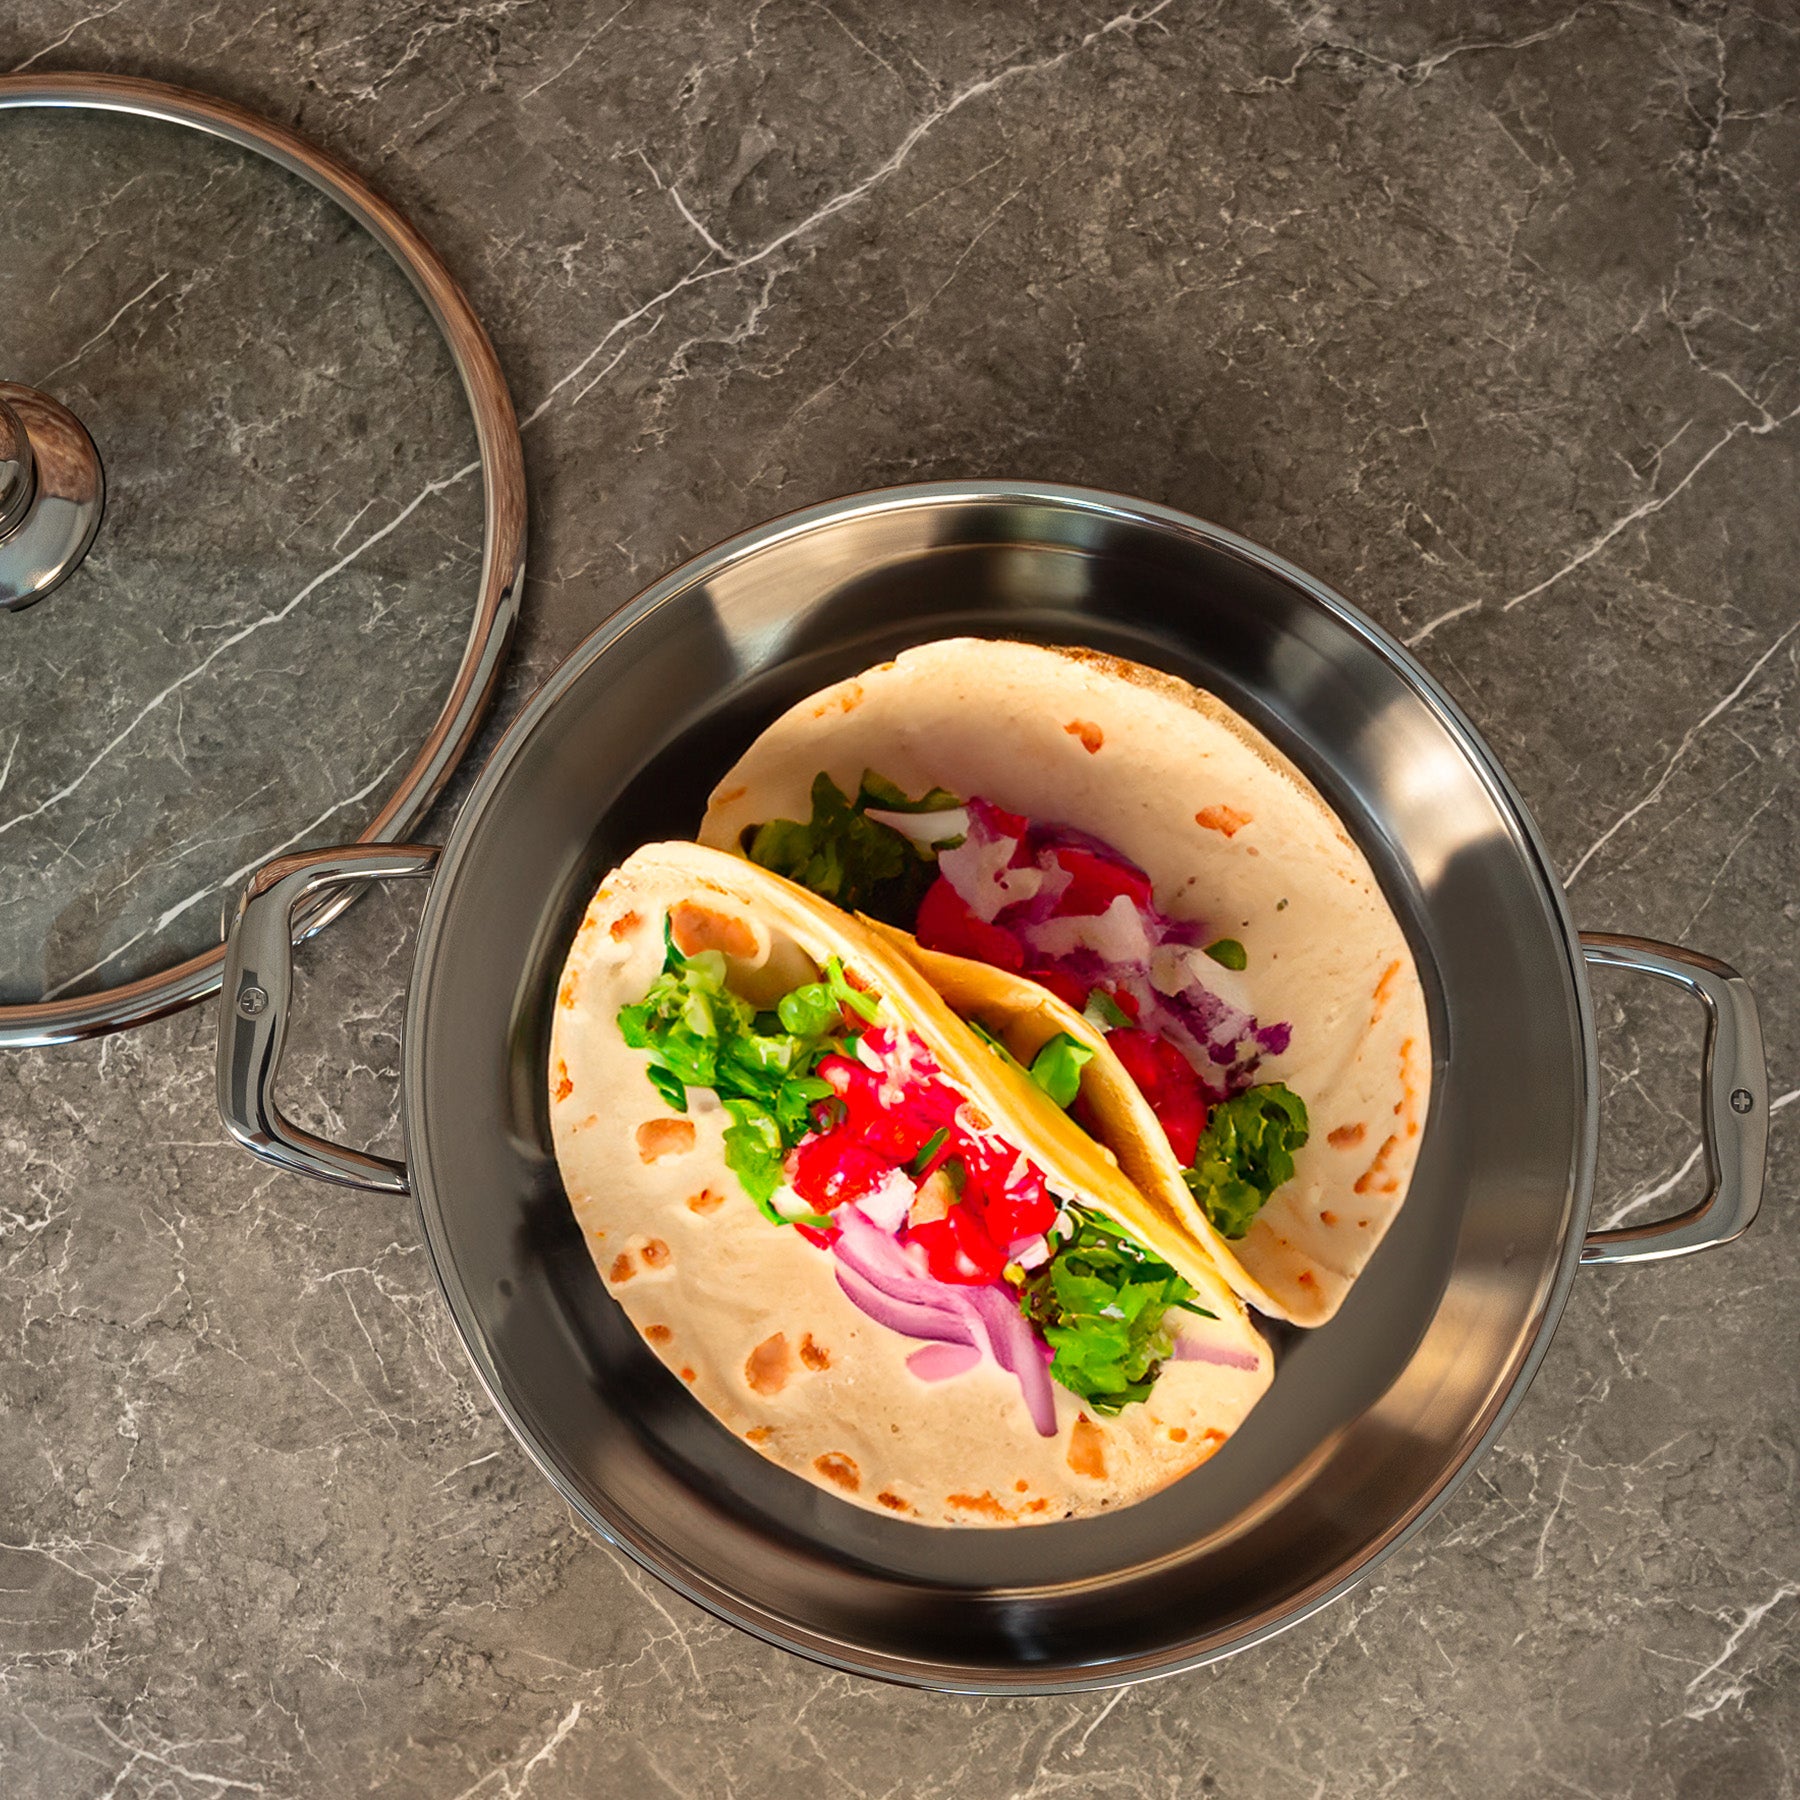 Premium Clad 5.3 qt Stainless Chef's Pan with Glass Lid - Induction in use with four tortillas dish on surface